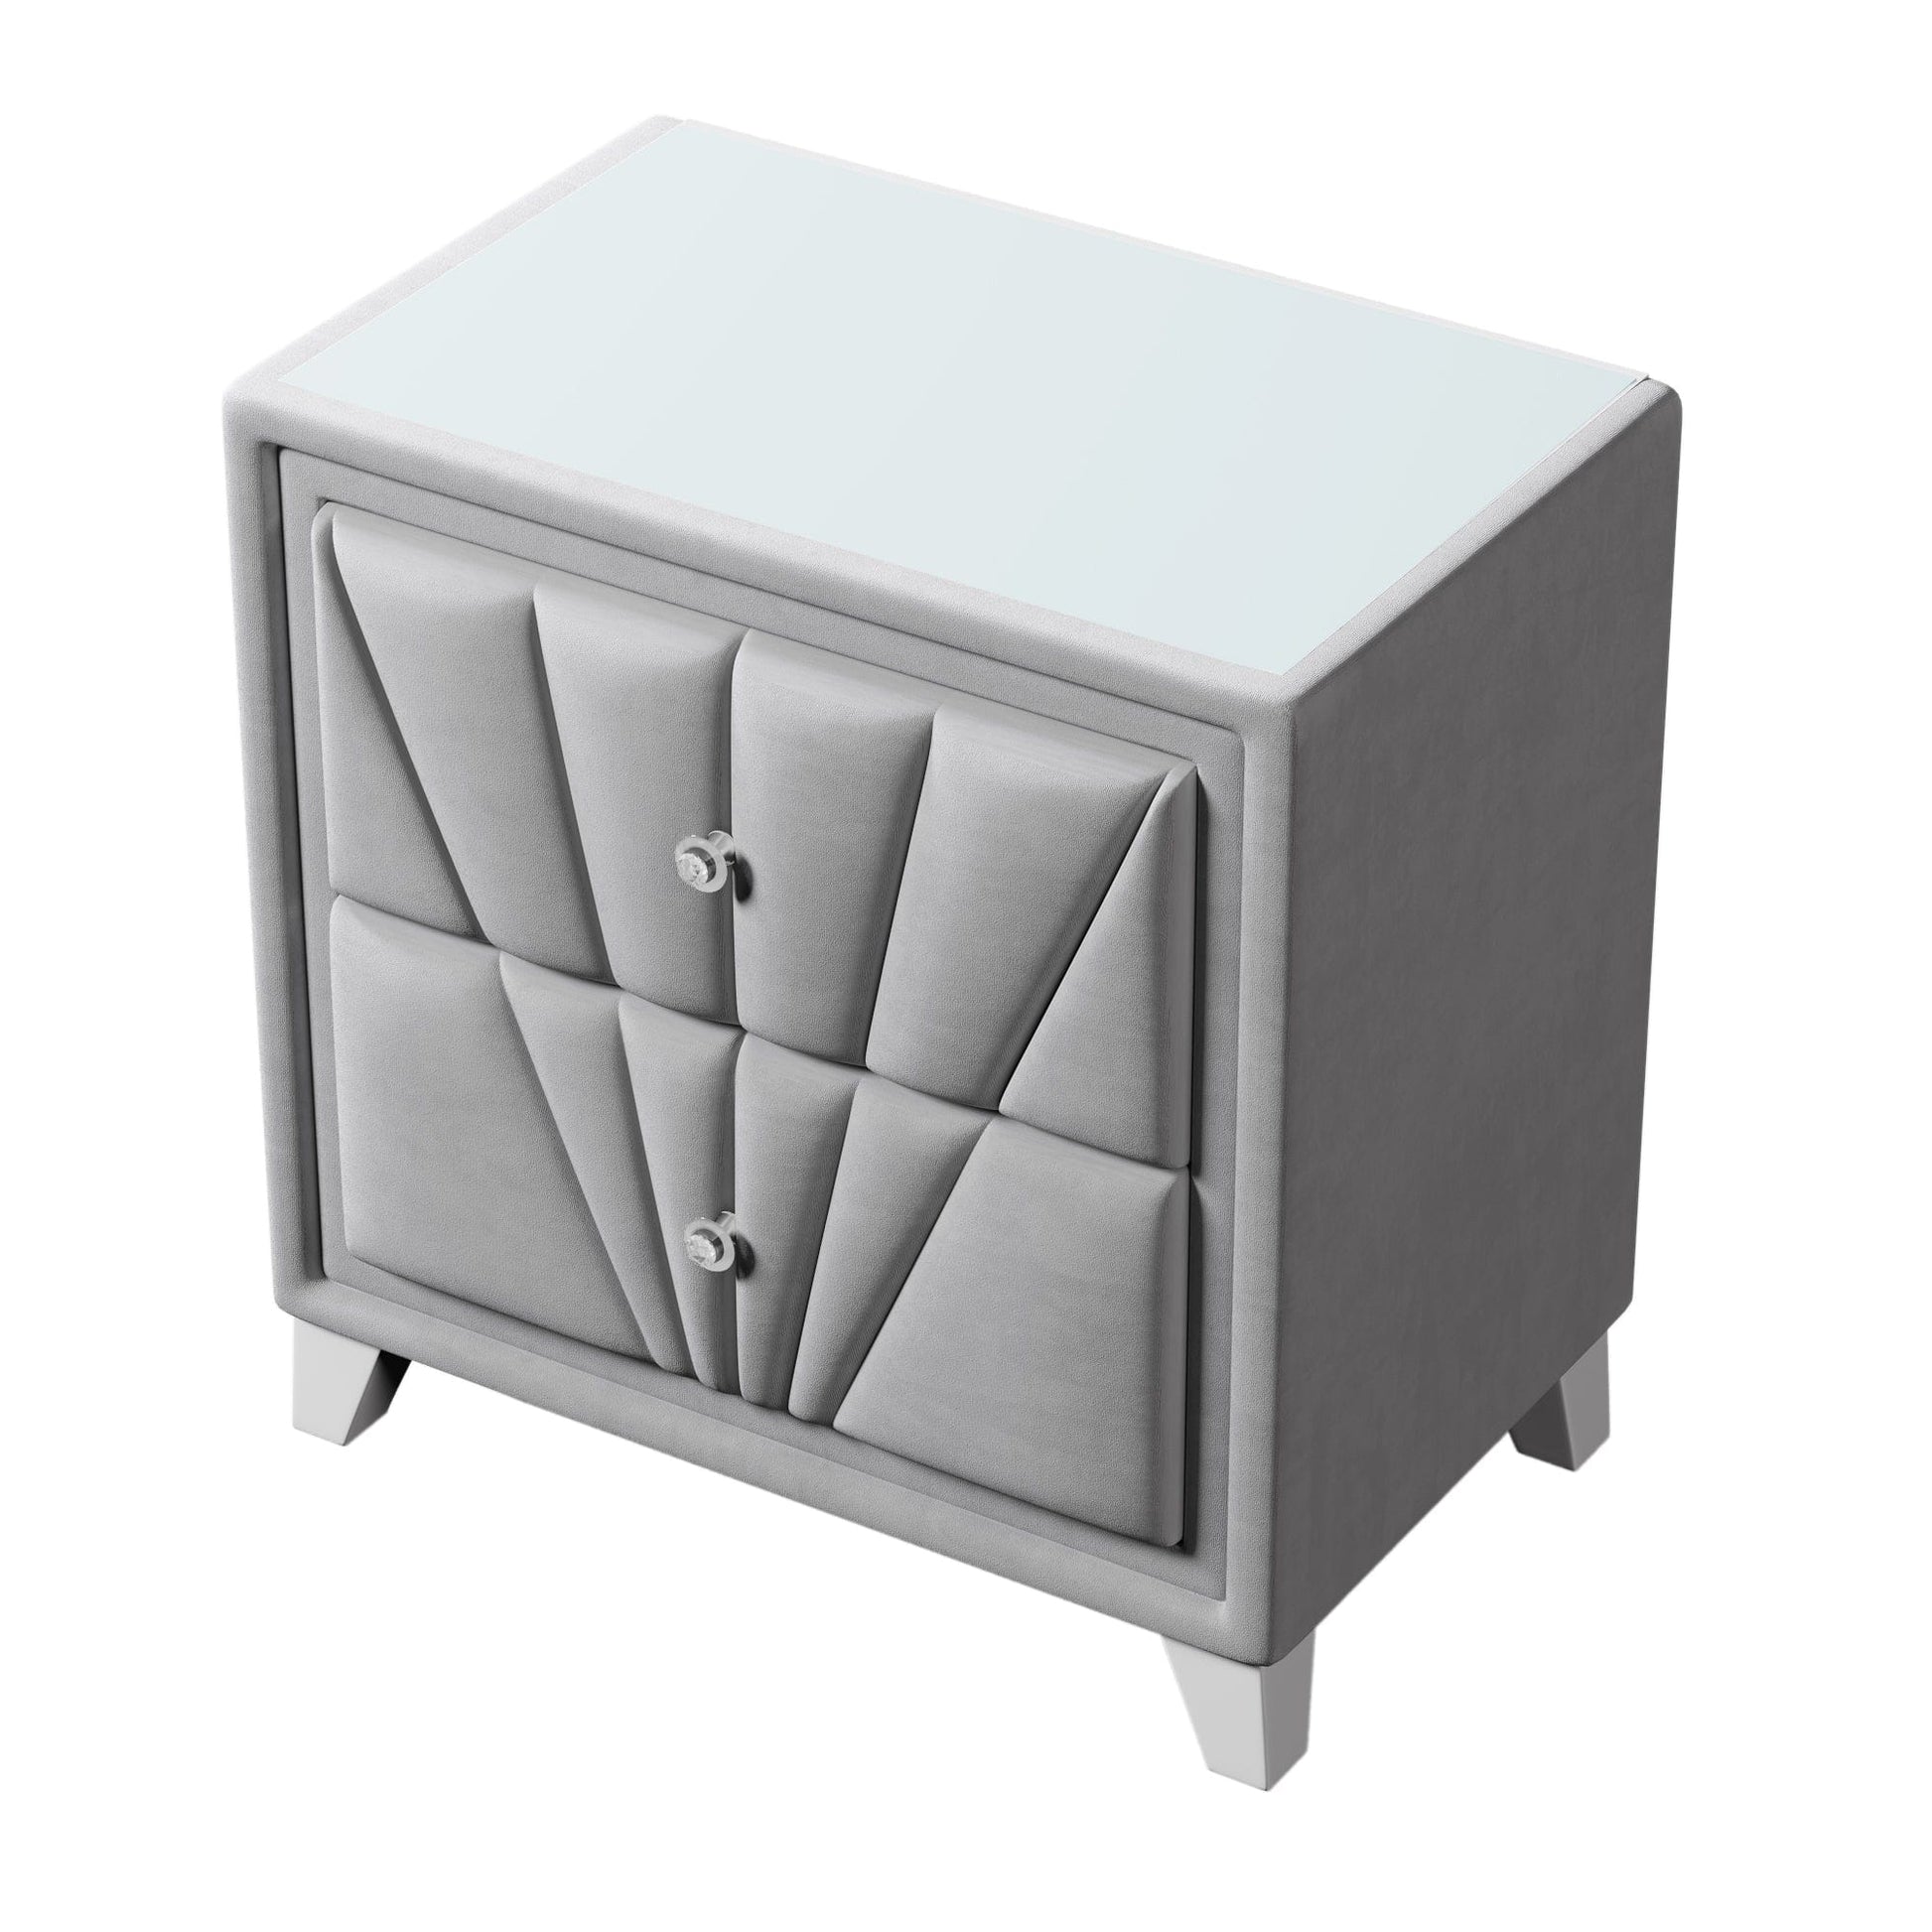 1st Choice Furniture Direct Luxurious Velvet Upholstered Glass Top Nightstand | Gray Solid Wood